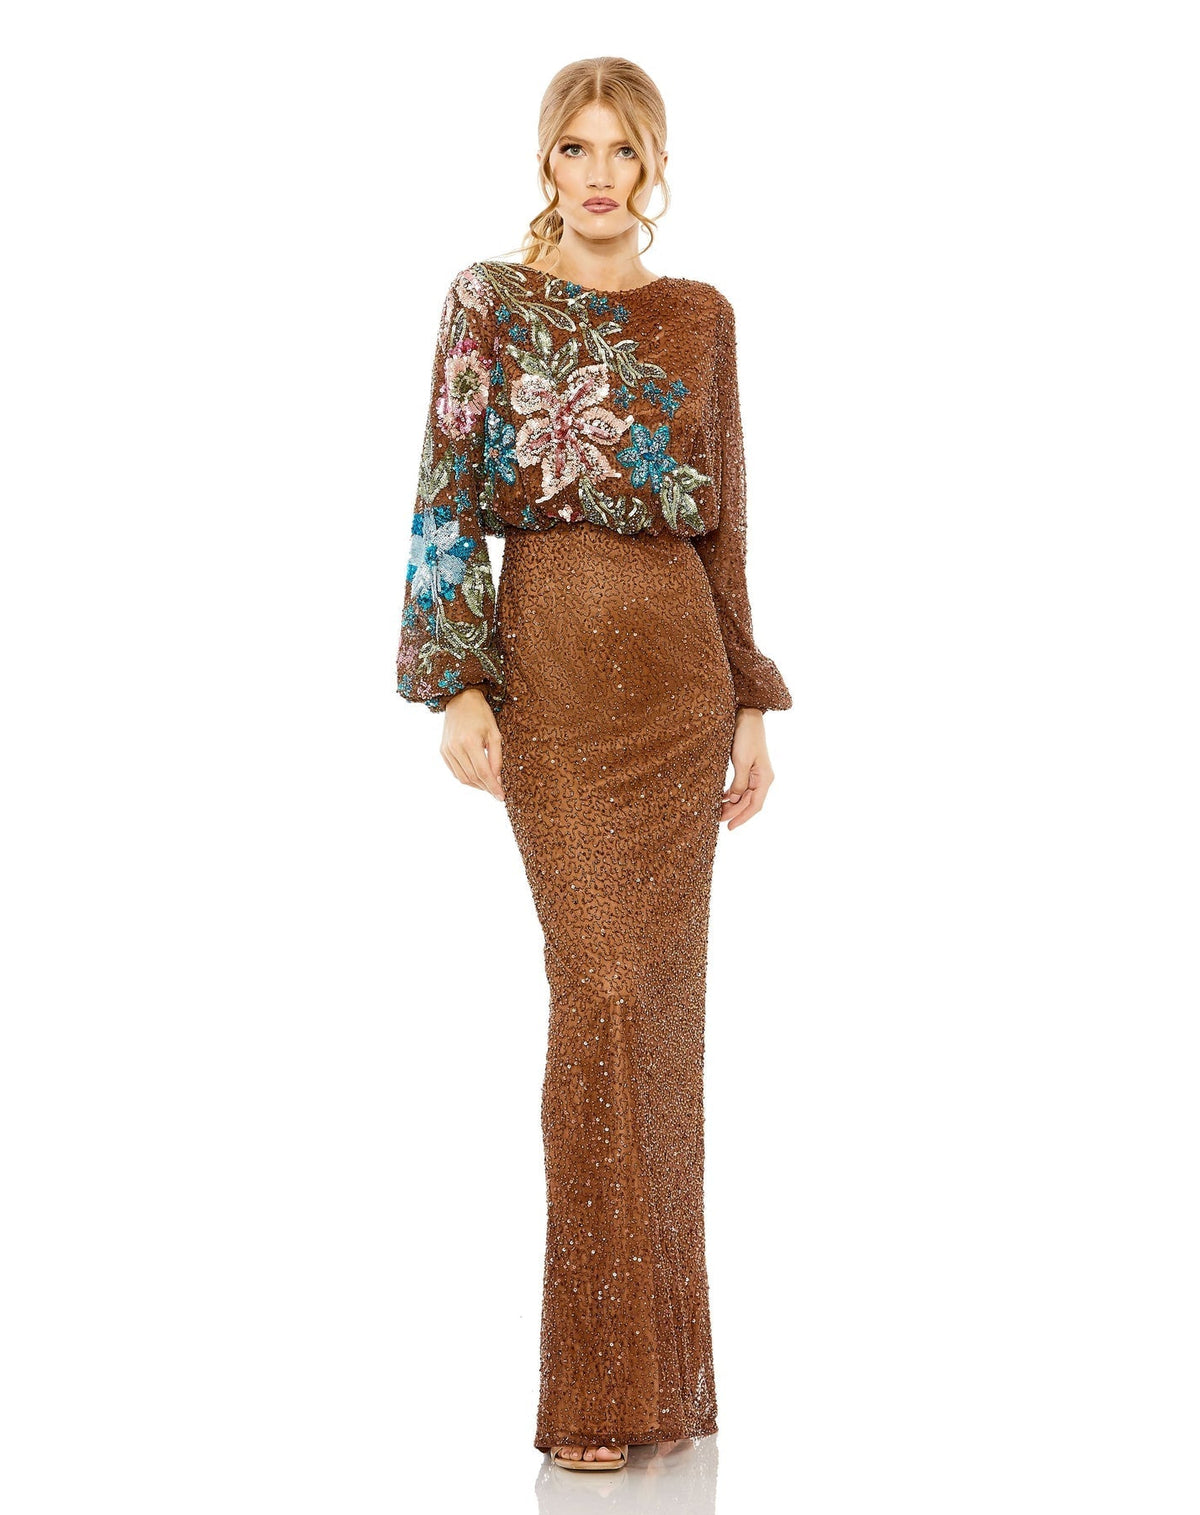 MAC DUGGAL, EMBELLISHED MULTI COLOR FLORAL HIGH NECK GOWN, Style #5615, MOCHA FRONT